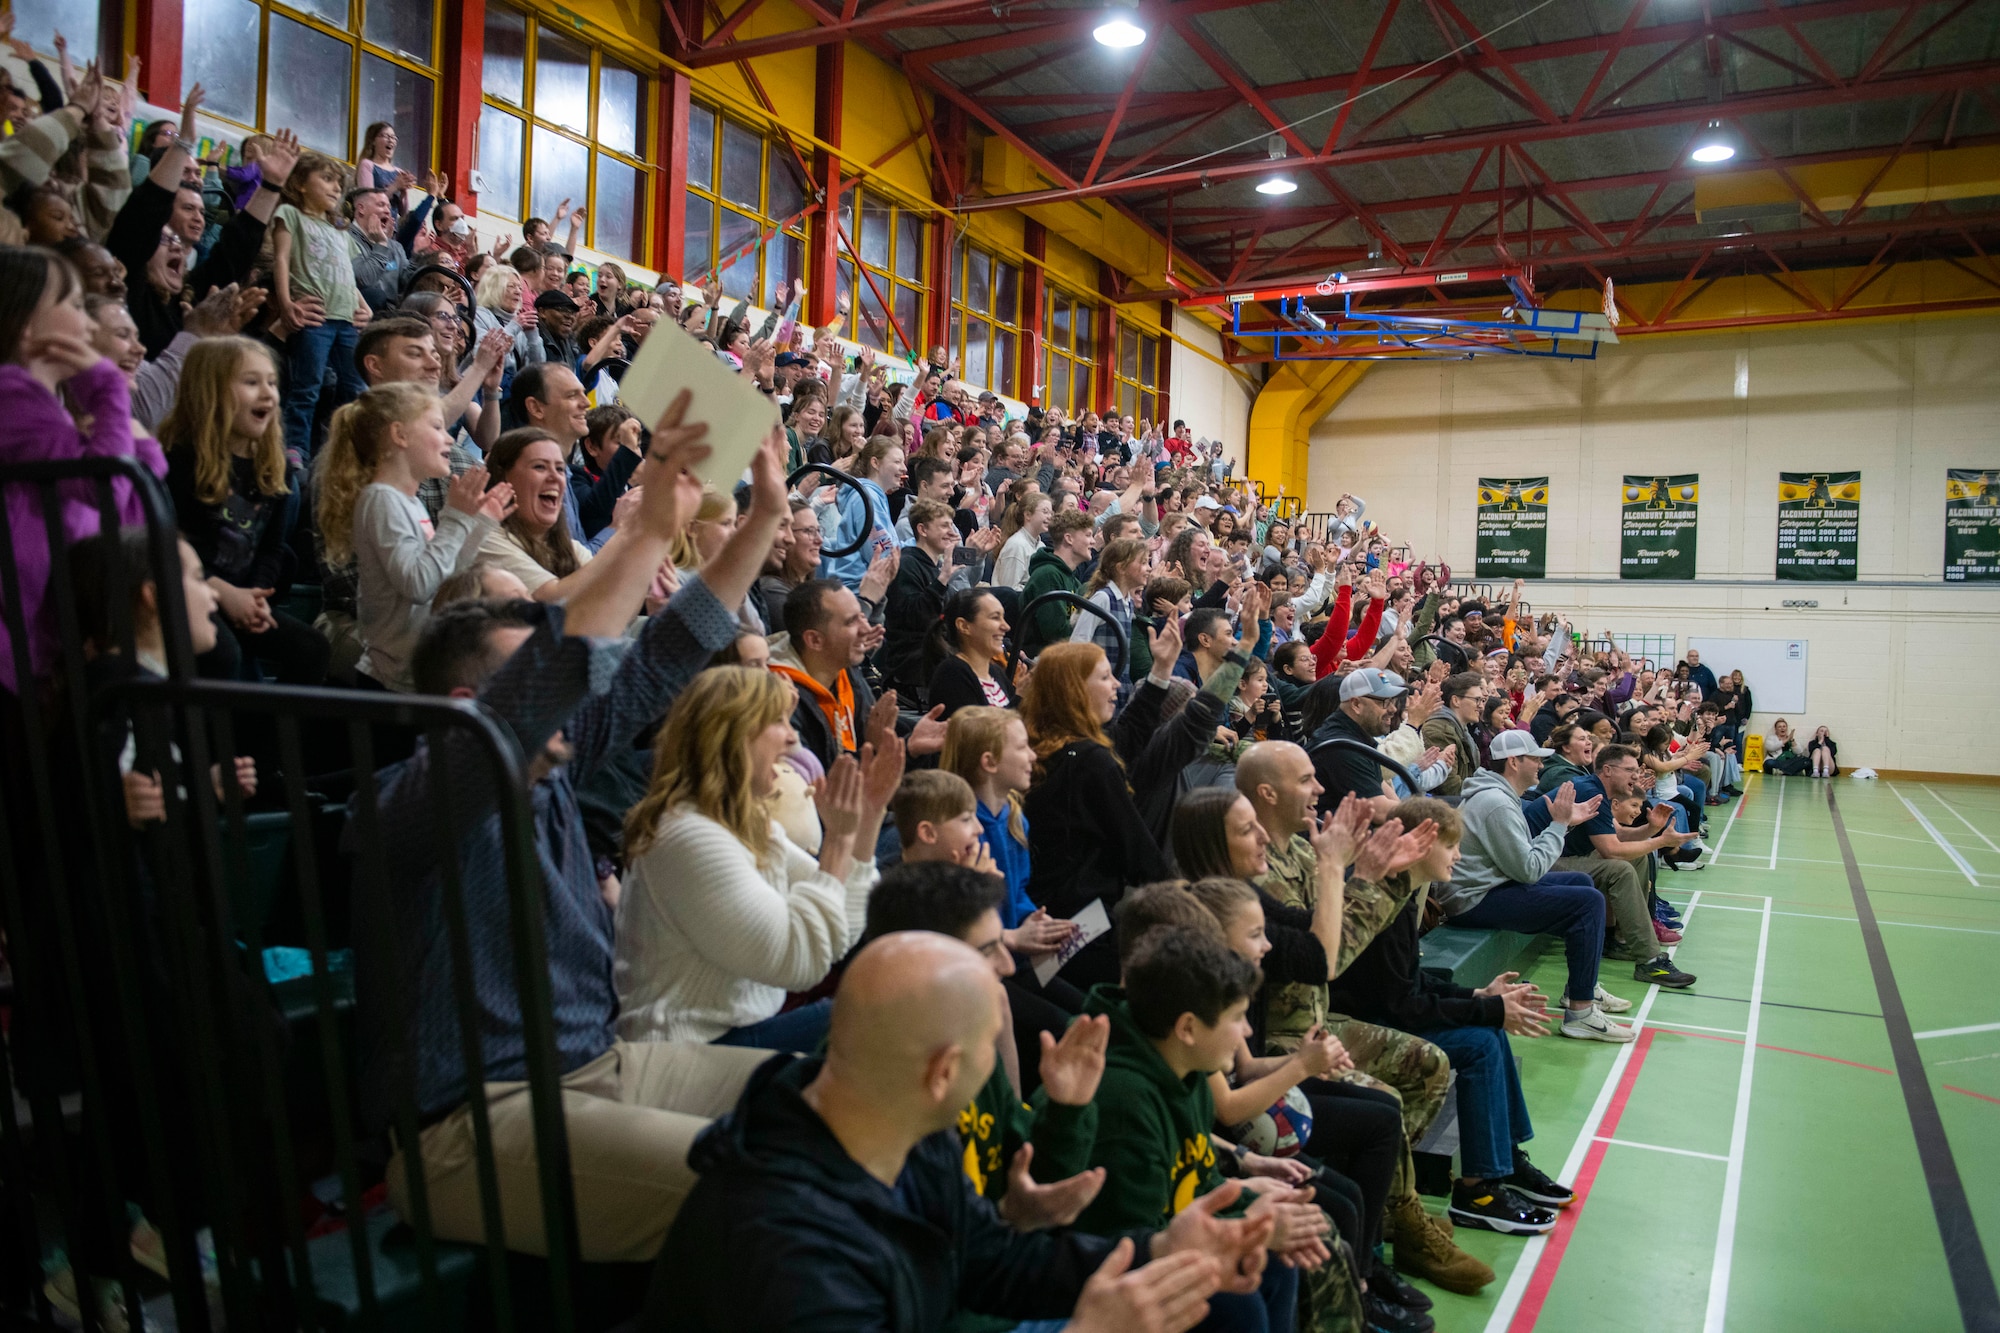 The crowd cheers during a performance by the Harlem Globetrotters at RAF Alconbury